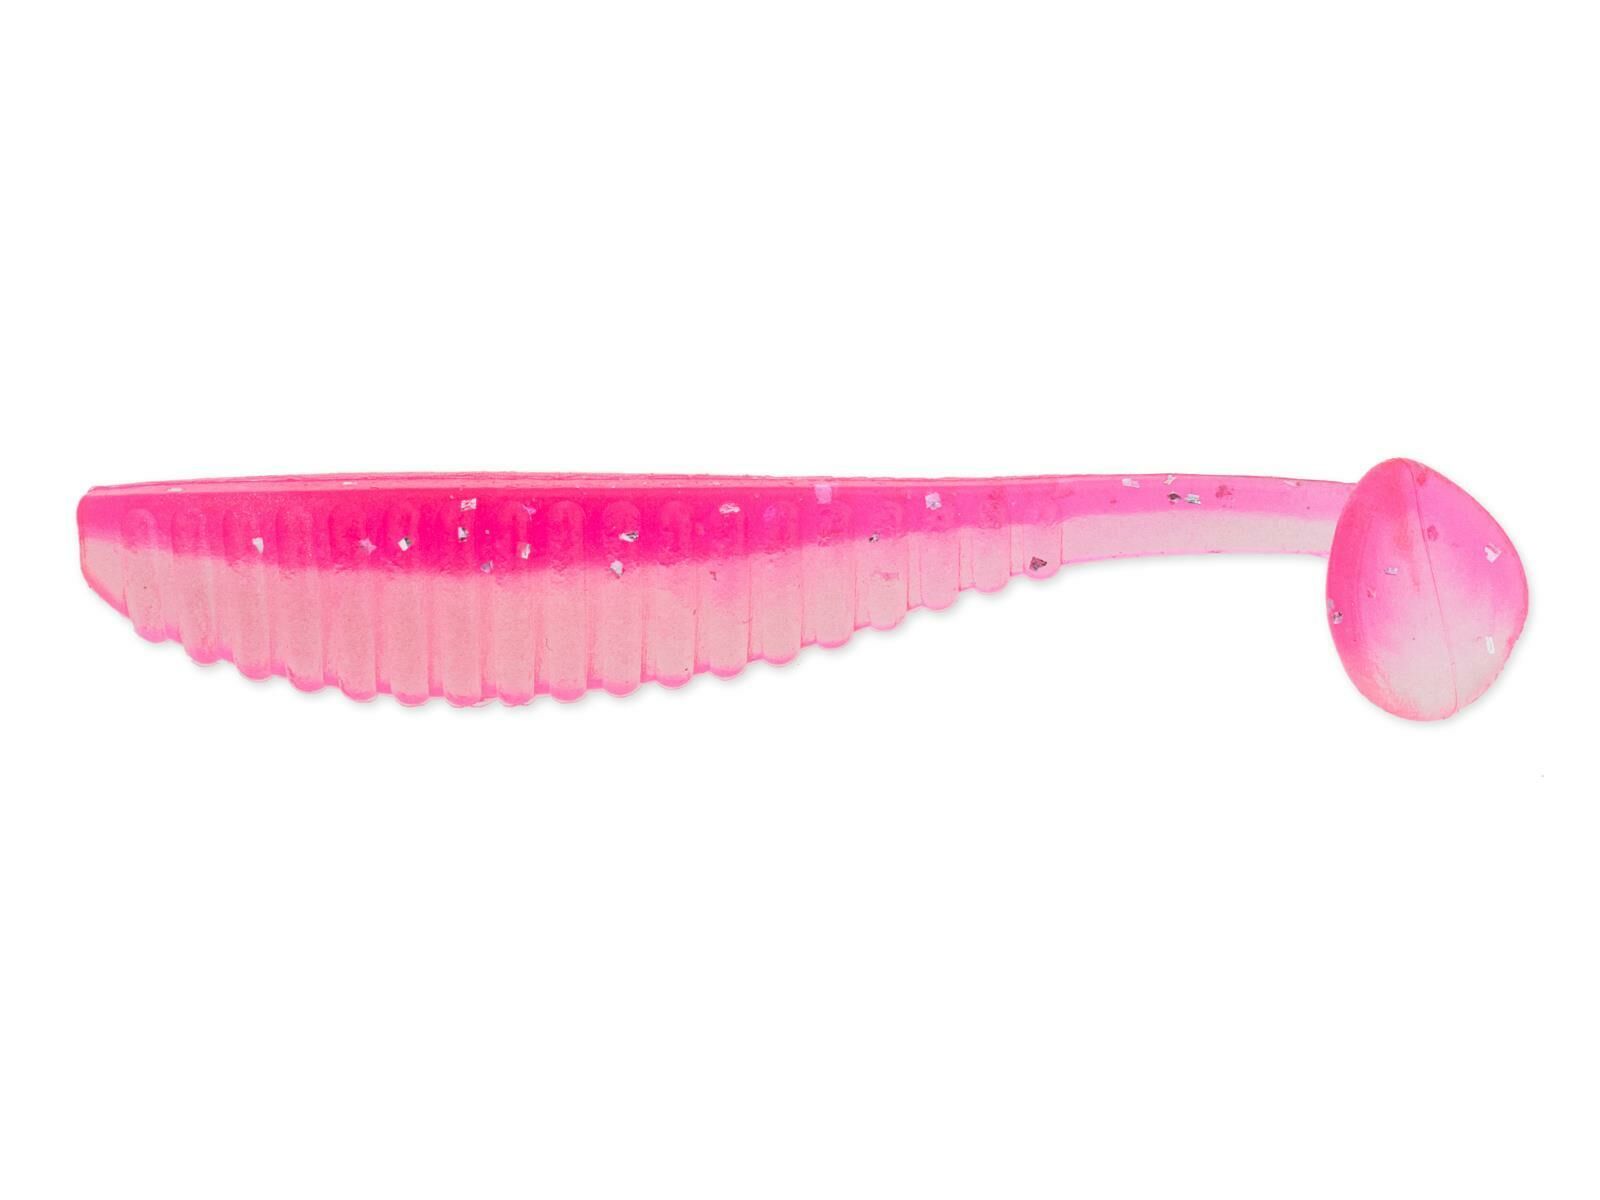 4.8" S-Cape Shad - Clear Pink